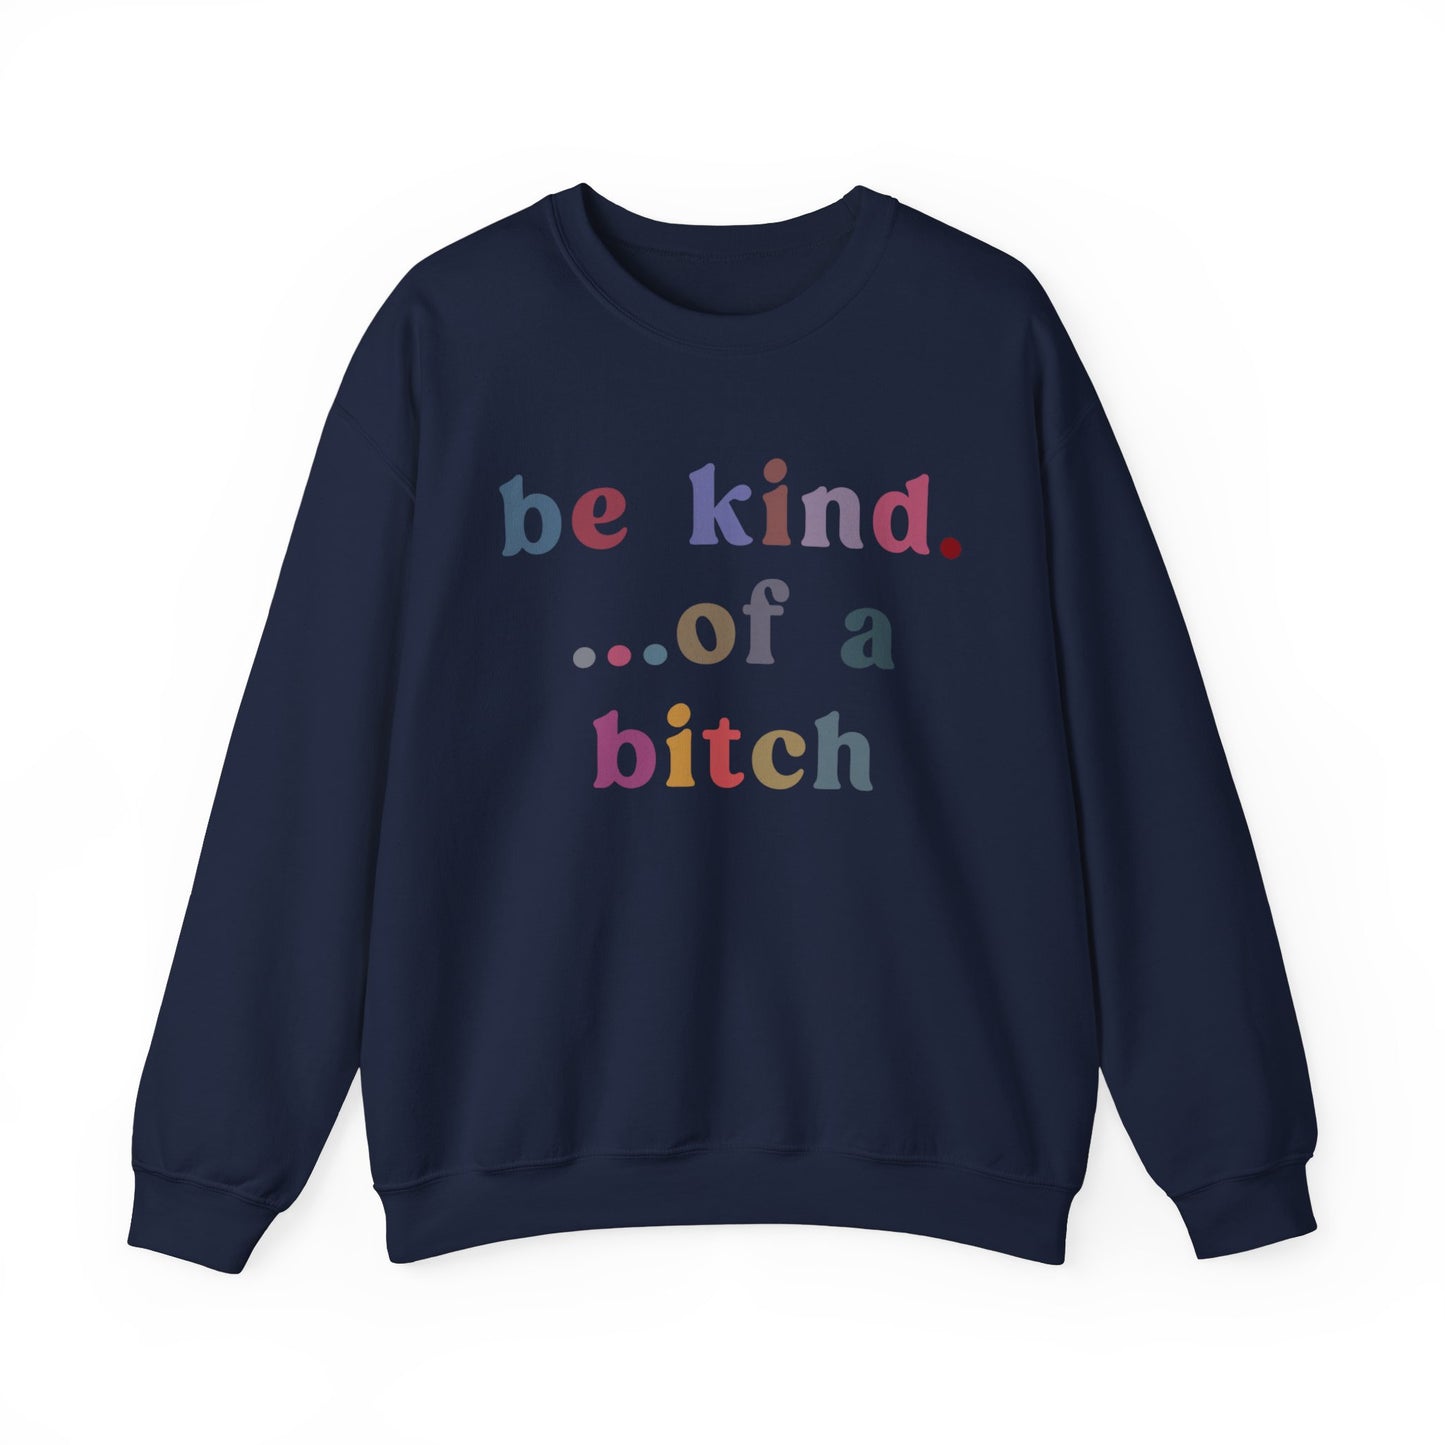 Be Kind Of A Bitch Sweatshirt, Funny Girls Sweatshirt, Funny Sassy Sweatshirt, Sarcasm Sweatshirt for Women, Funny Gift for Friends, S1199